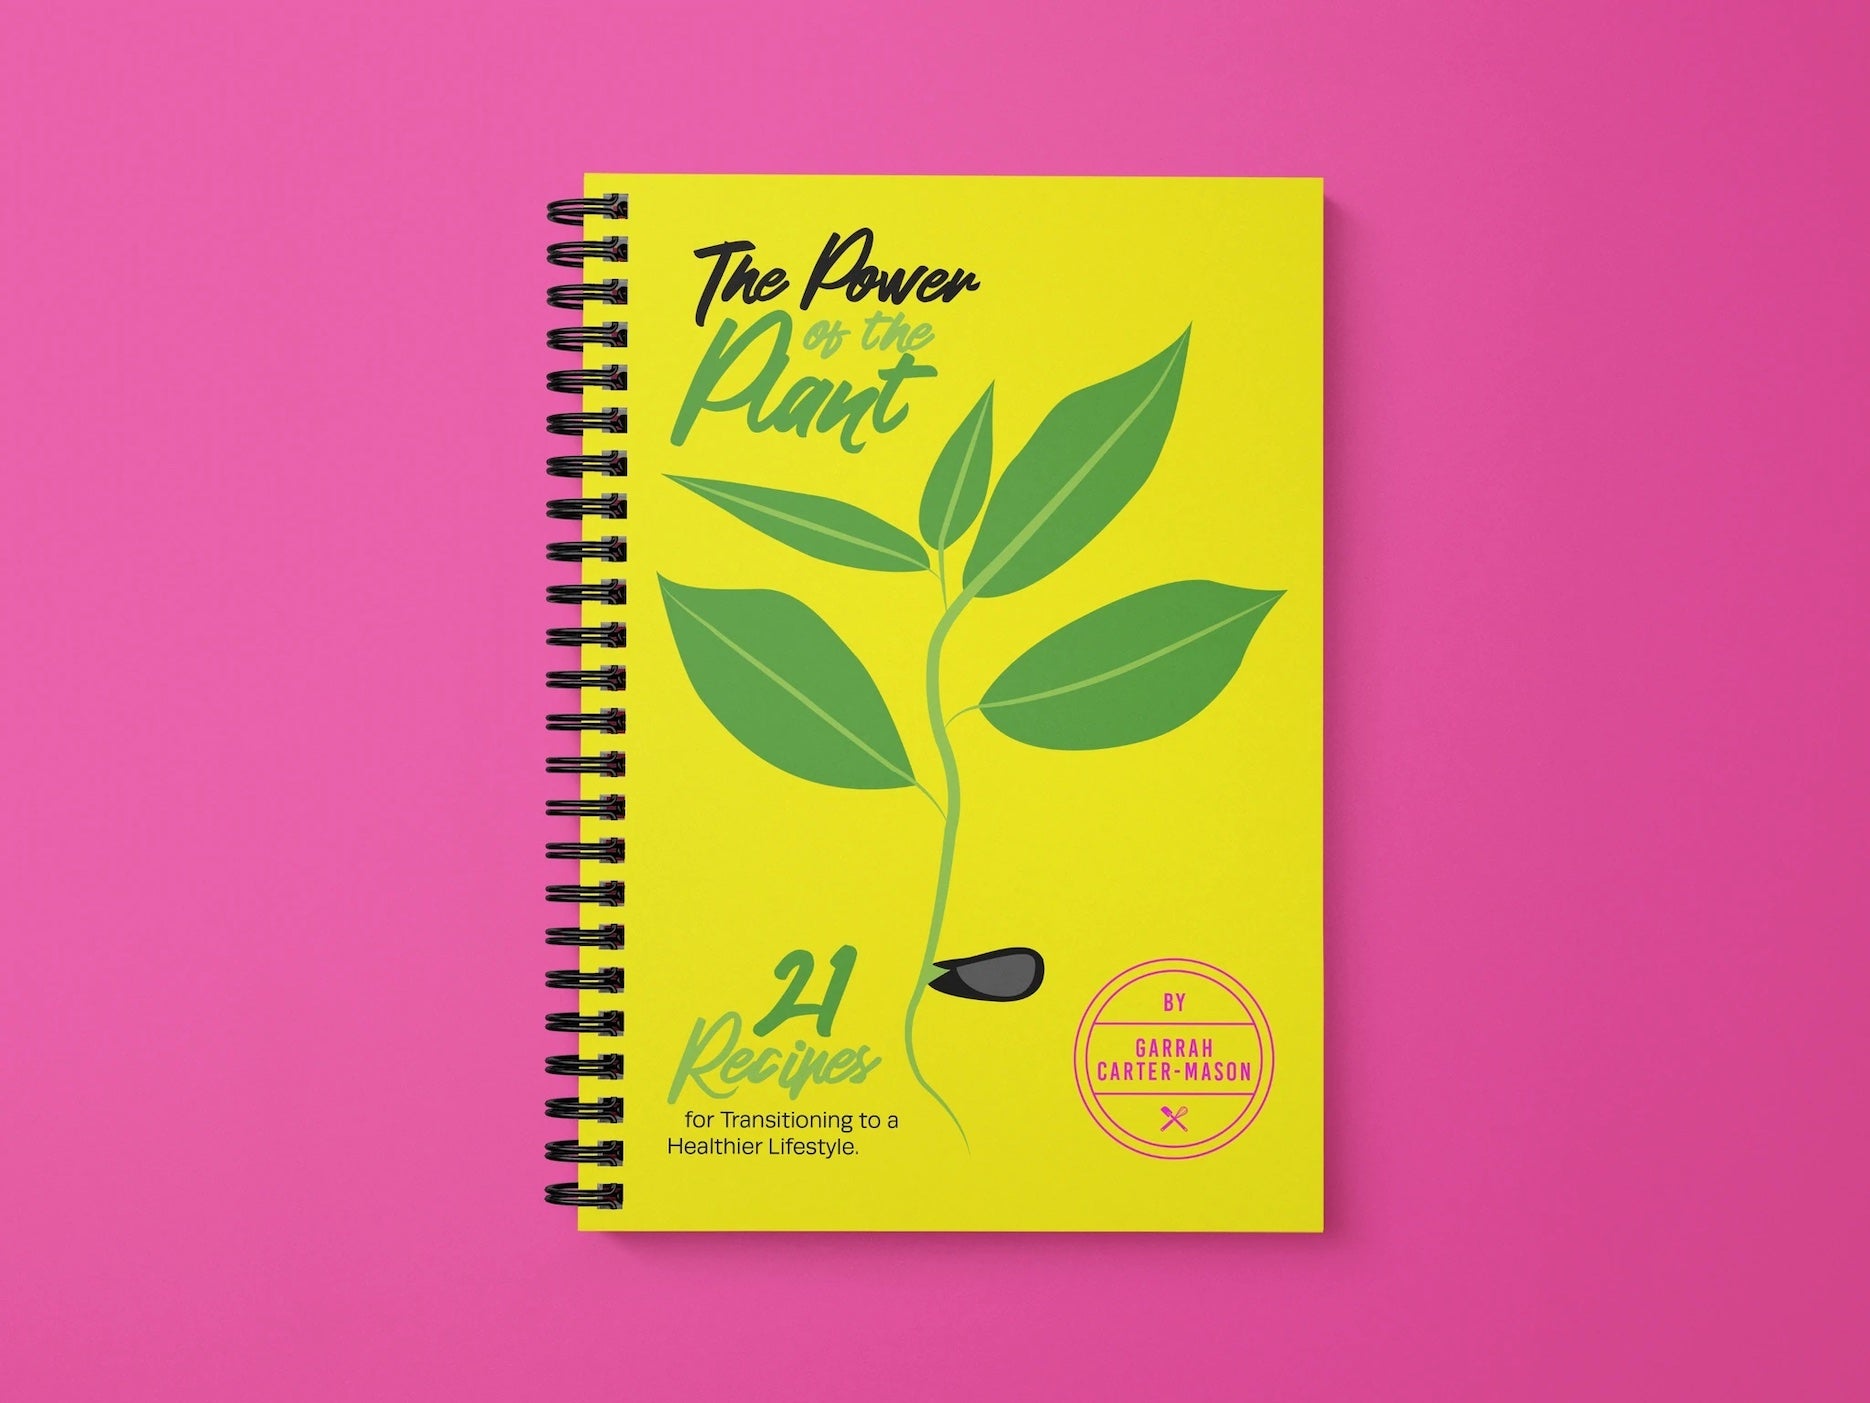 The cover of The Power of the Plant, the BirdFoodie cookbook